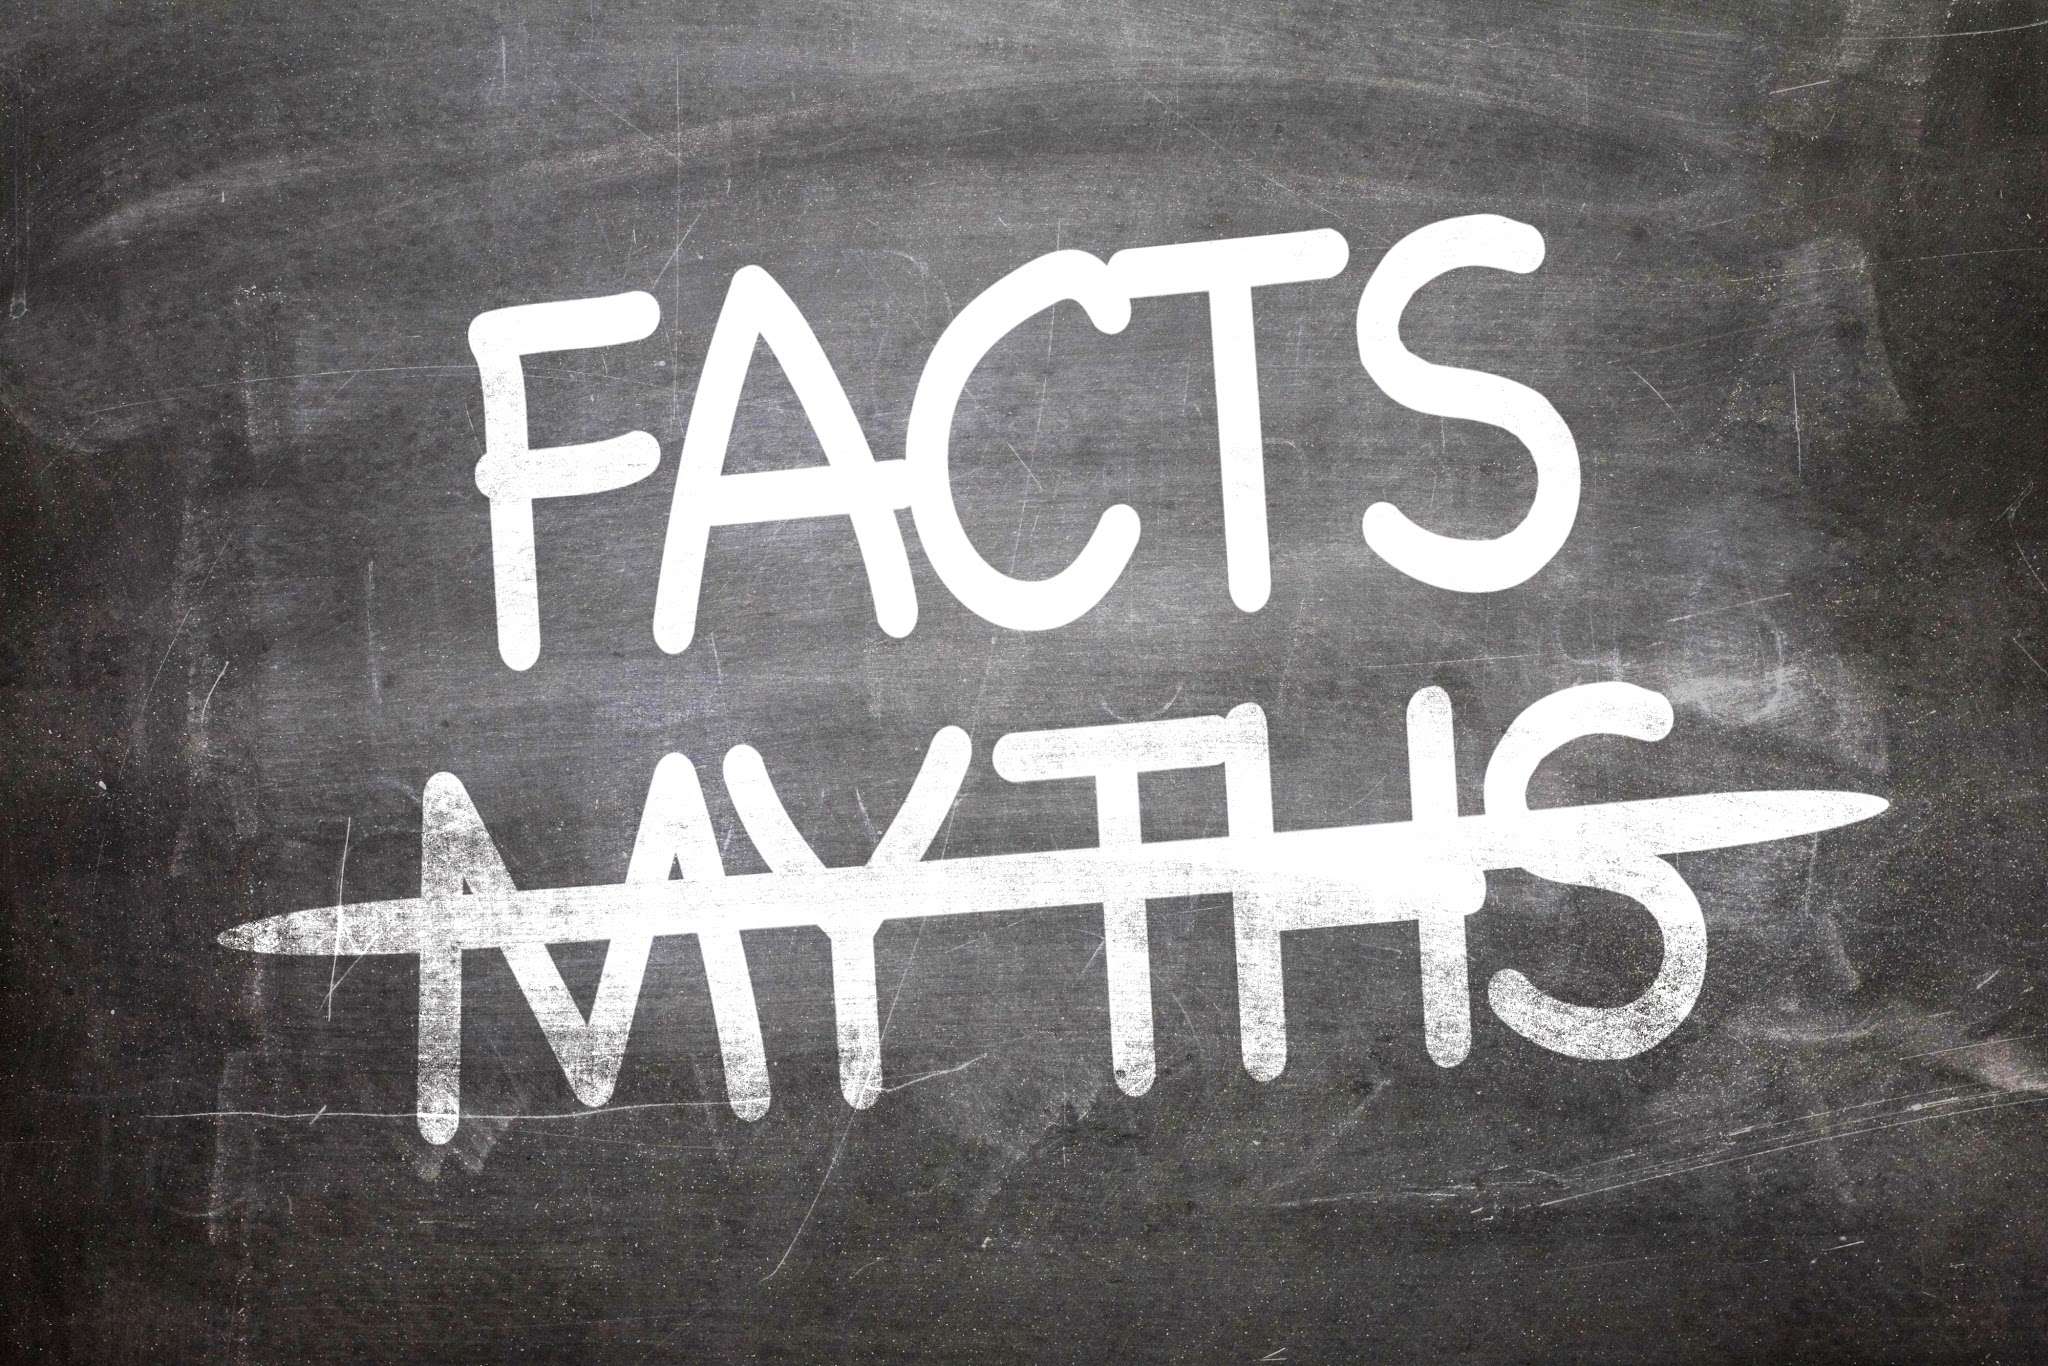 5 myths about investing debunked